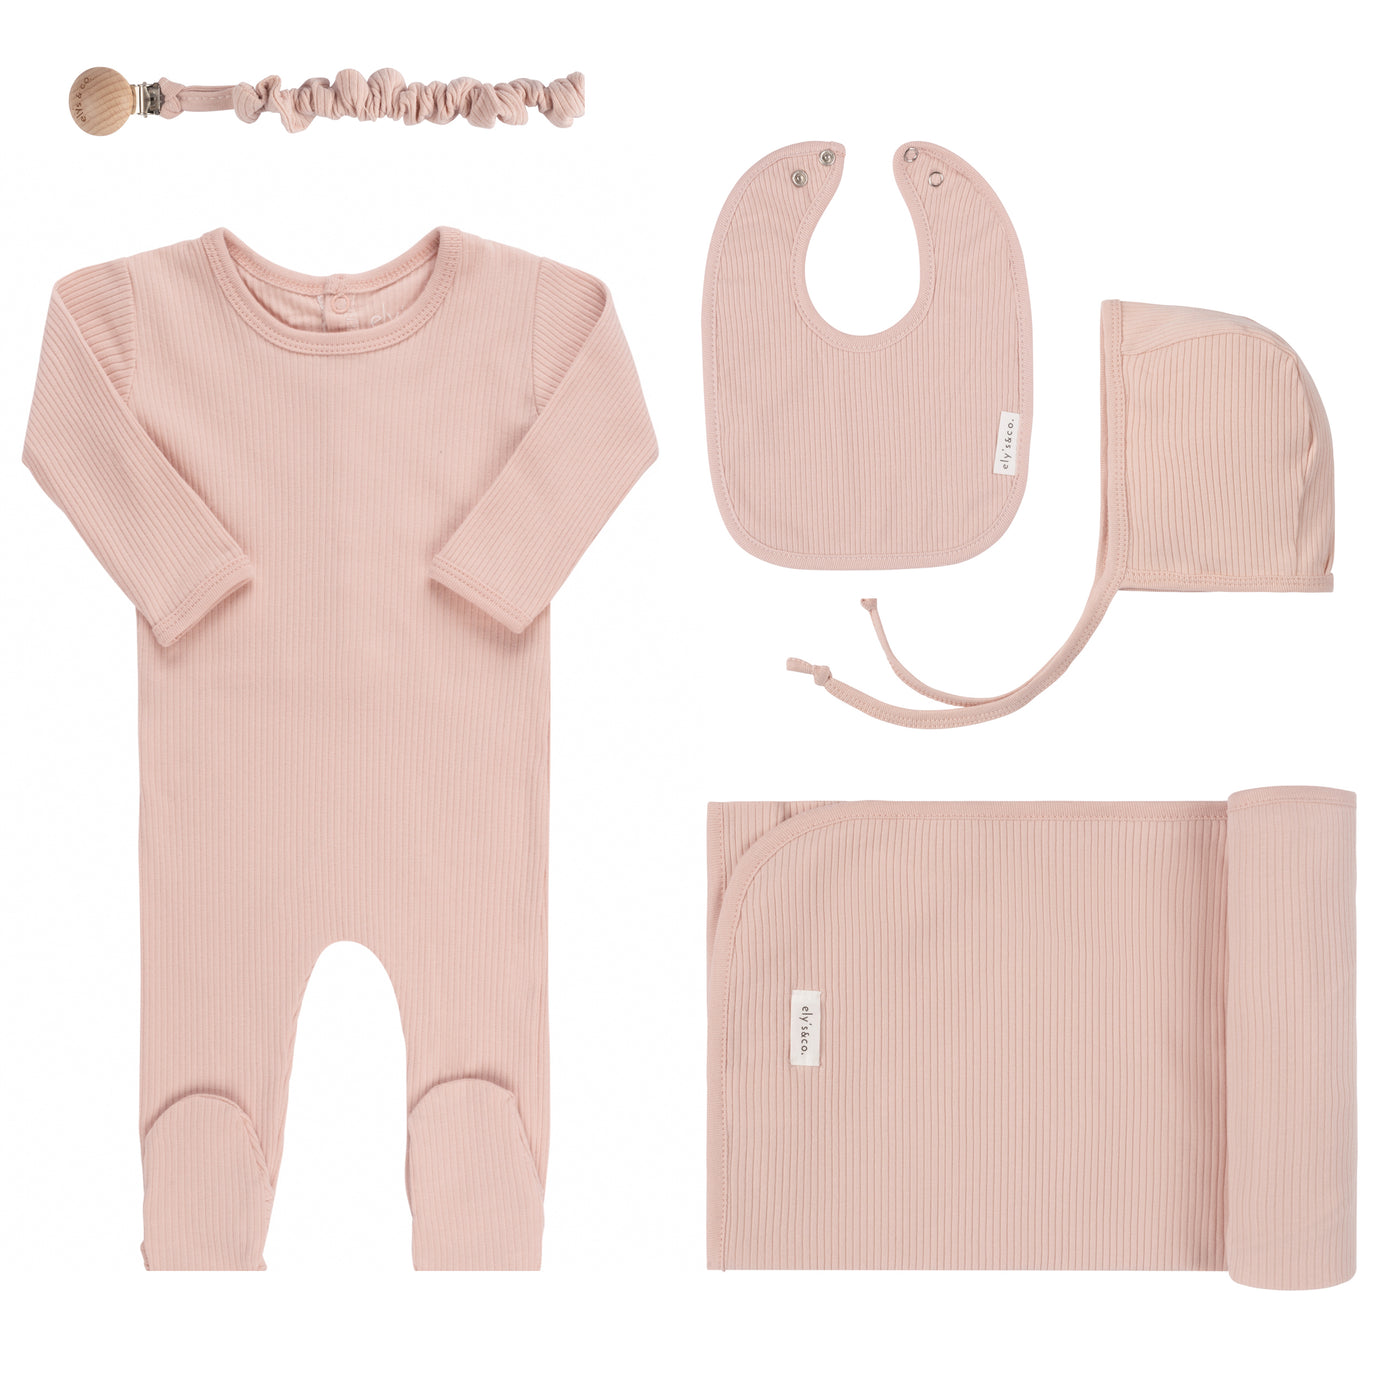 Ely's & Co. Ribbed Solid Collection Blush Five Piece Set